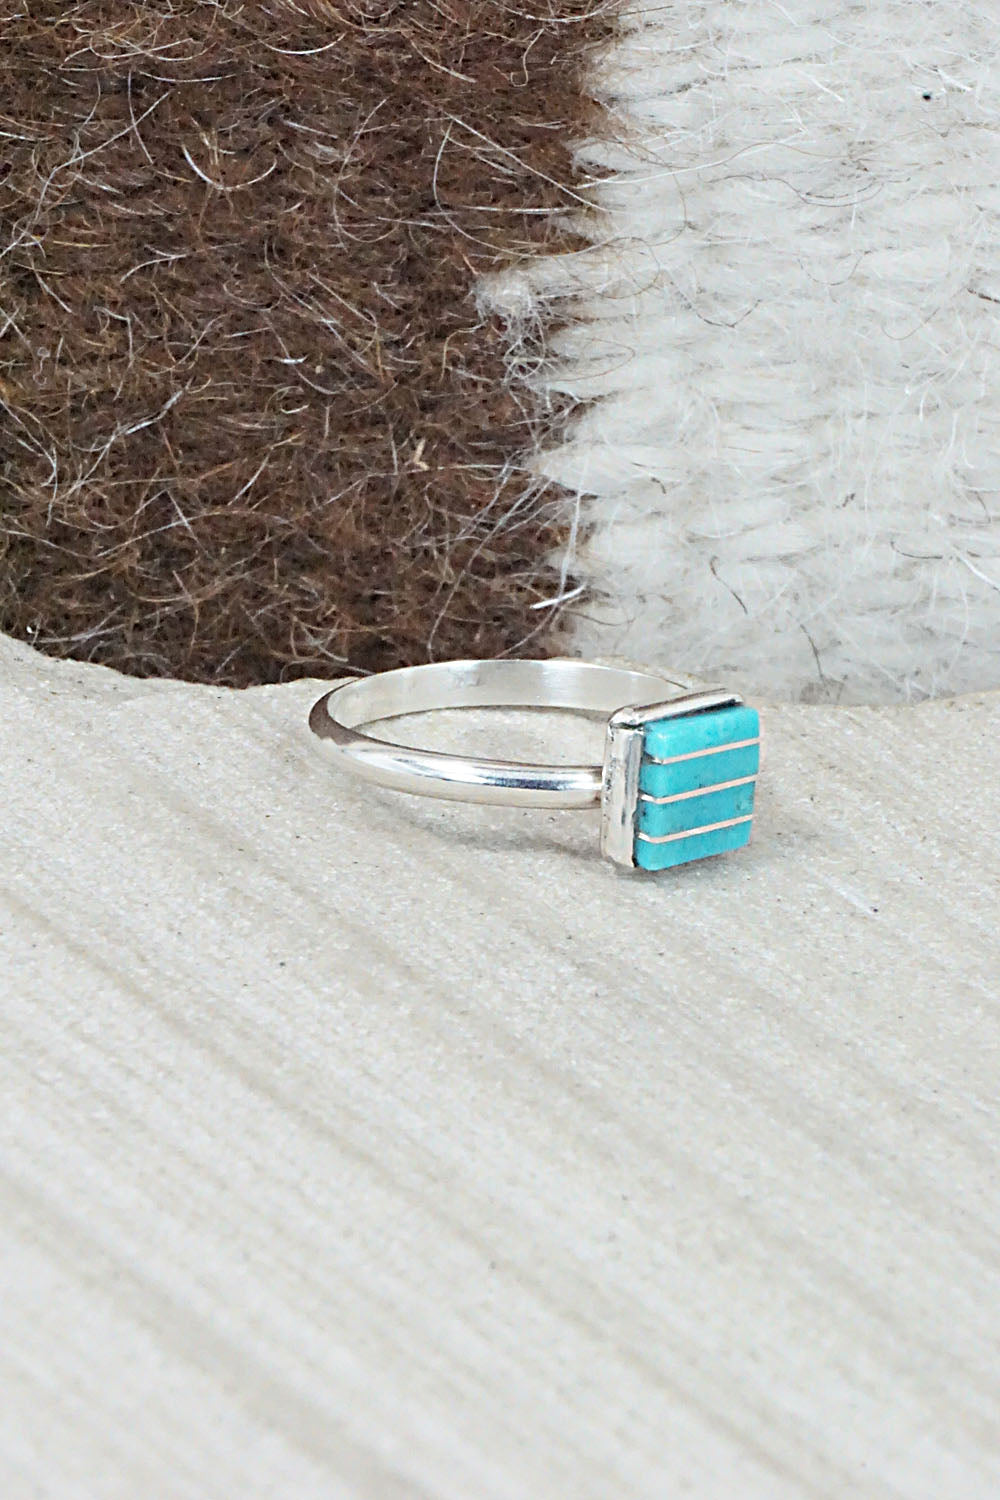 Turquoise & Sterling Silver Ring - Janelle Shebola - Size 5.5